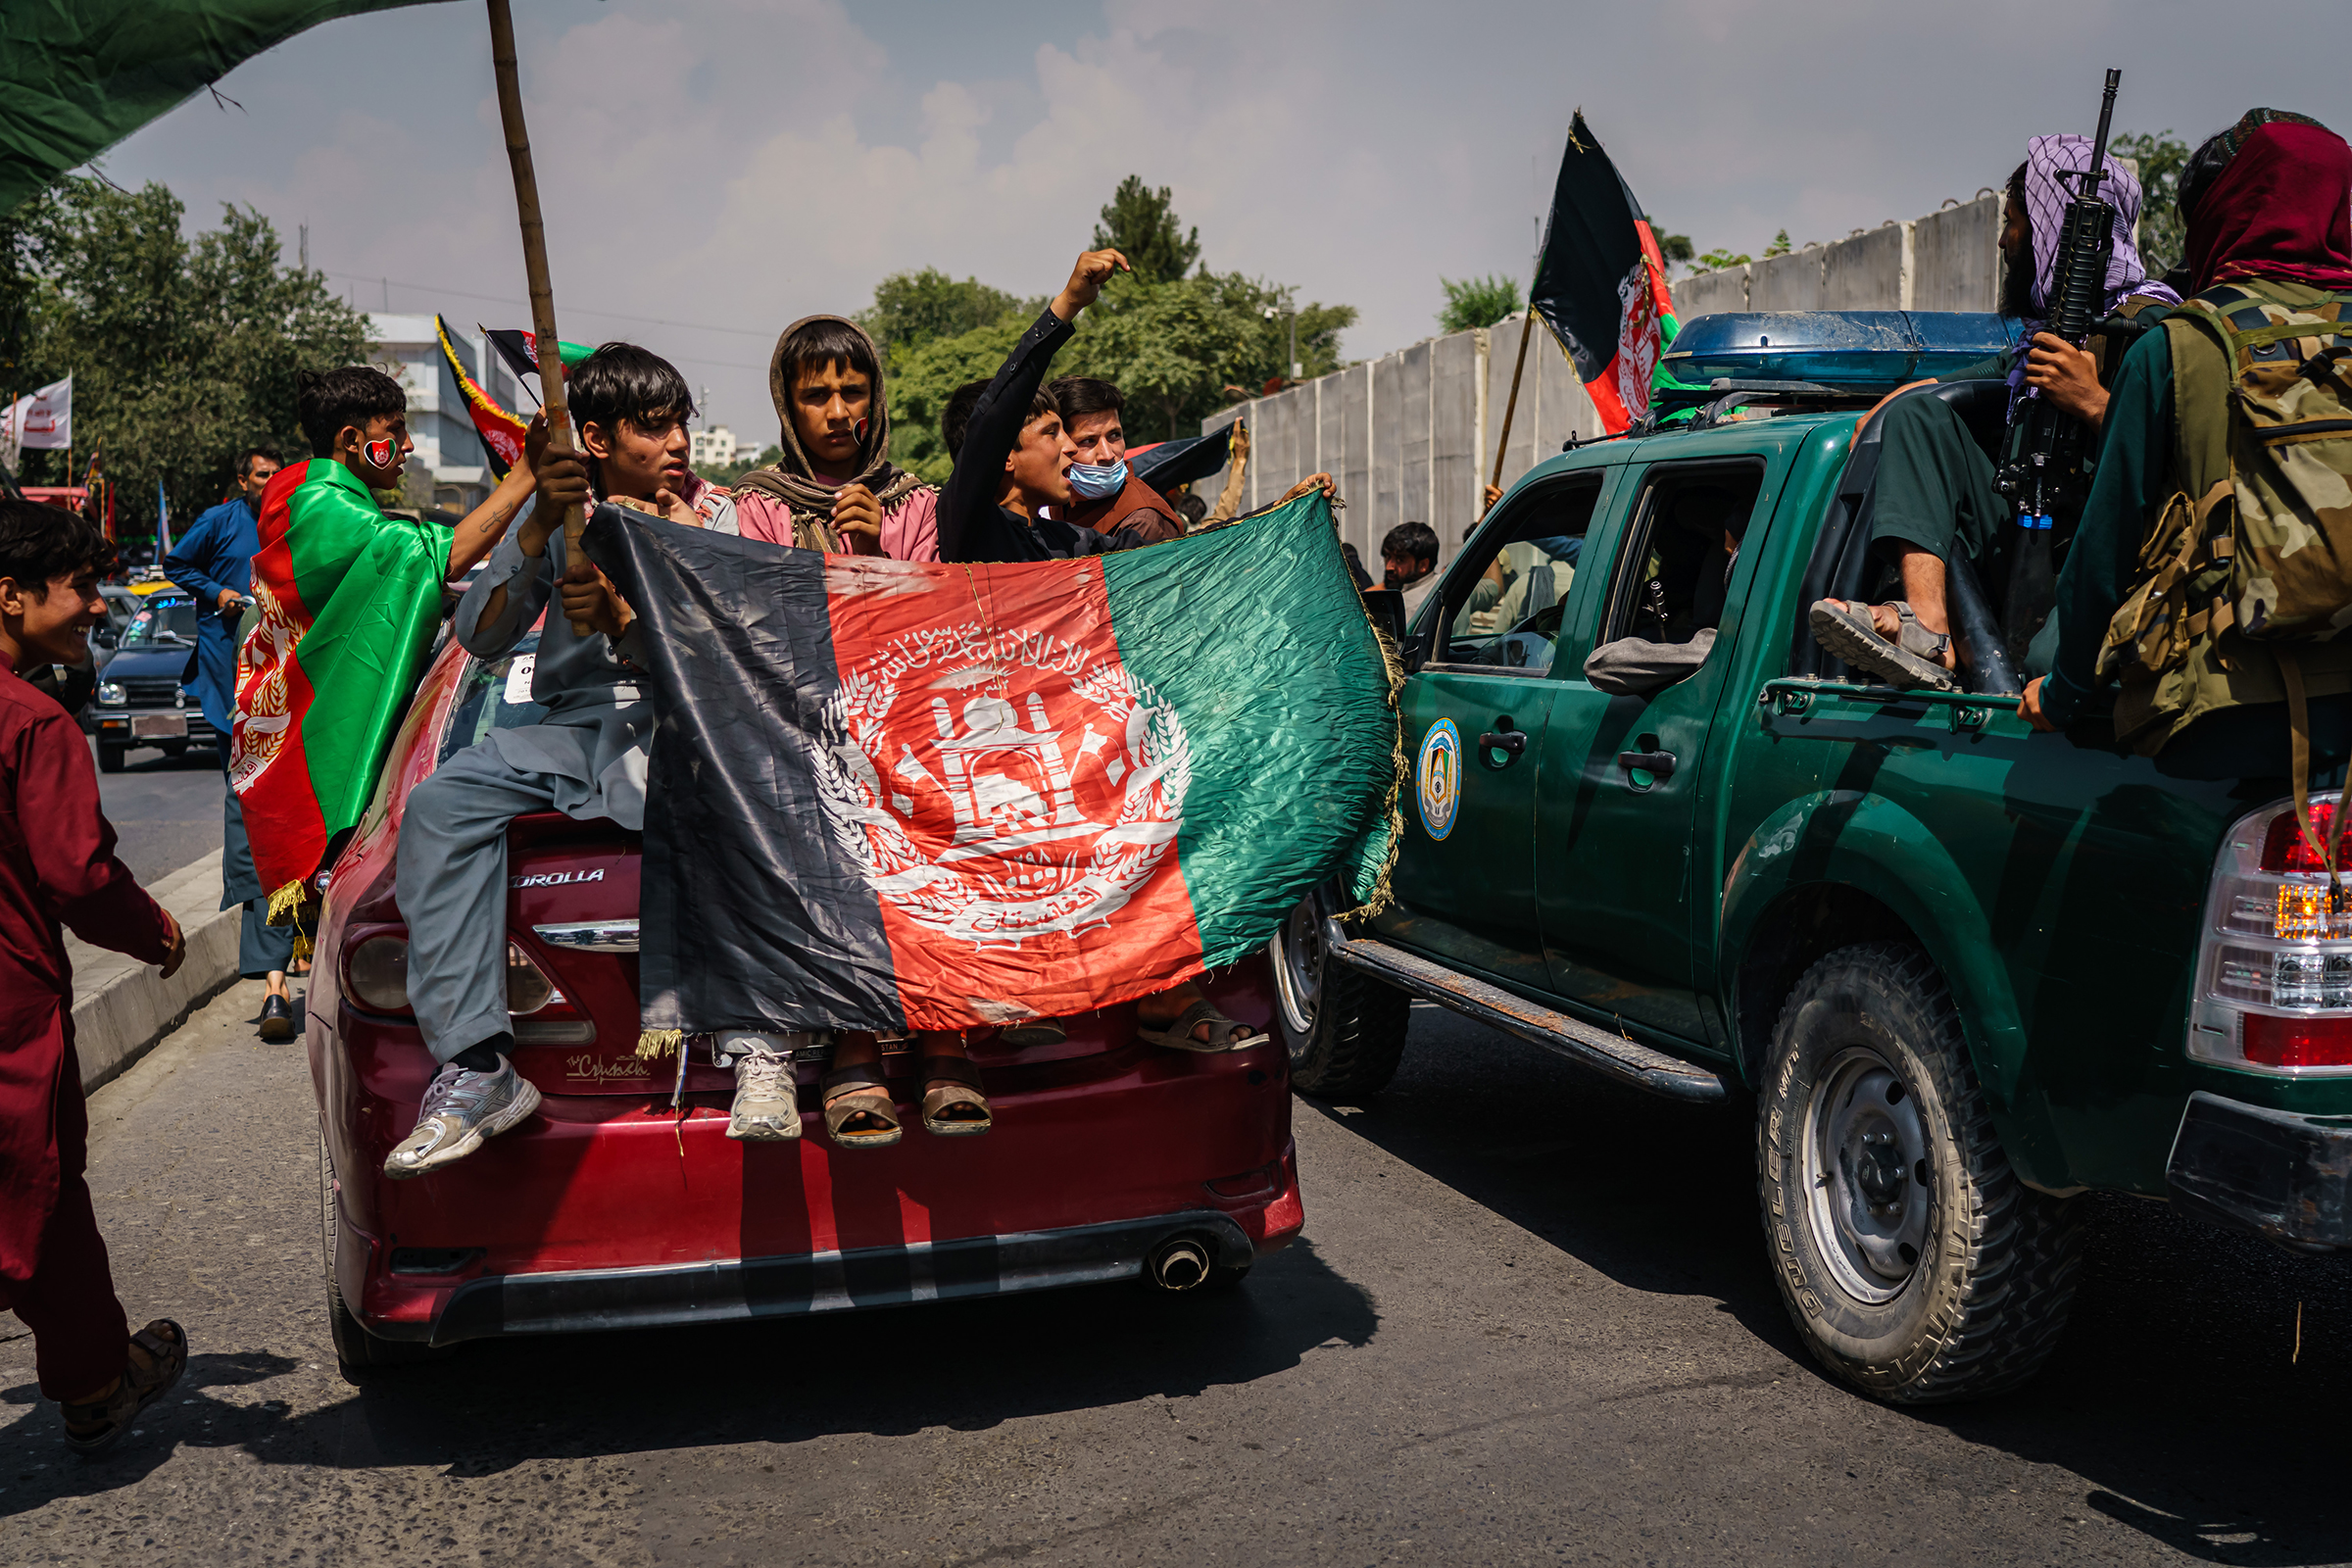 Afghans march while carrying banners and the flag of the Islamic Republic of Afghanistan, despite the presence of Taliban fighters, in Kabul on Aug. 19, 2021.